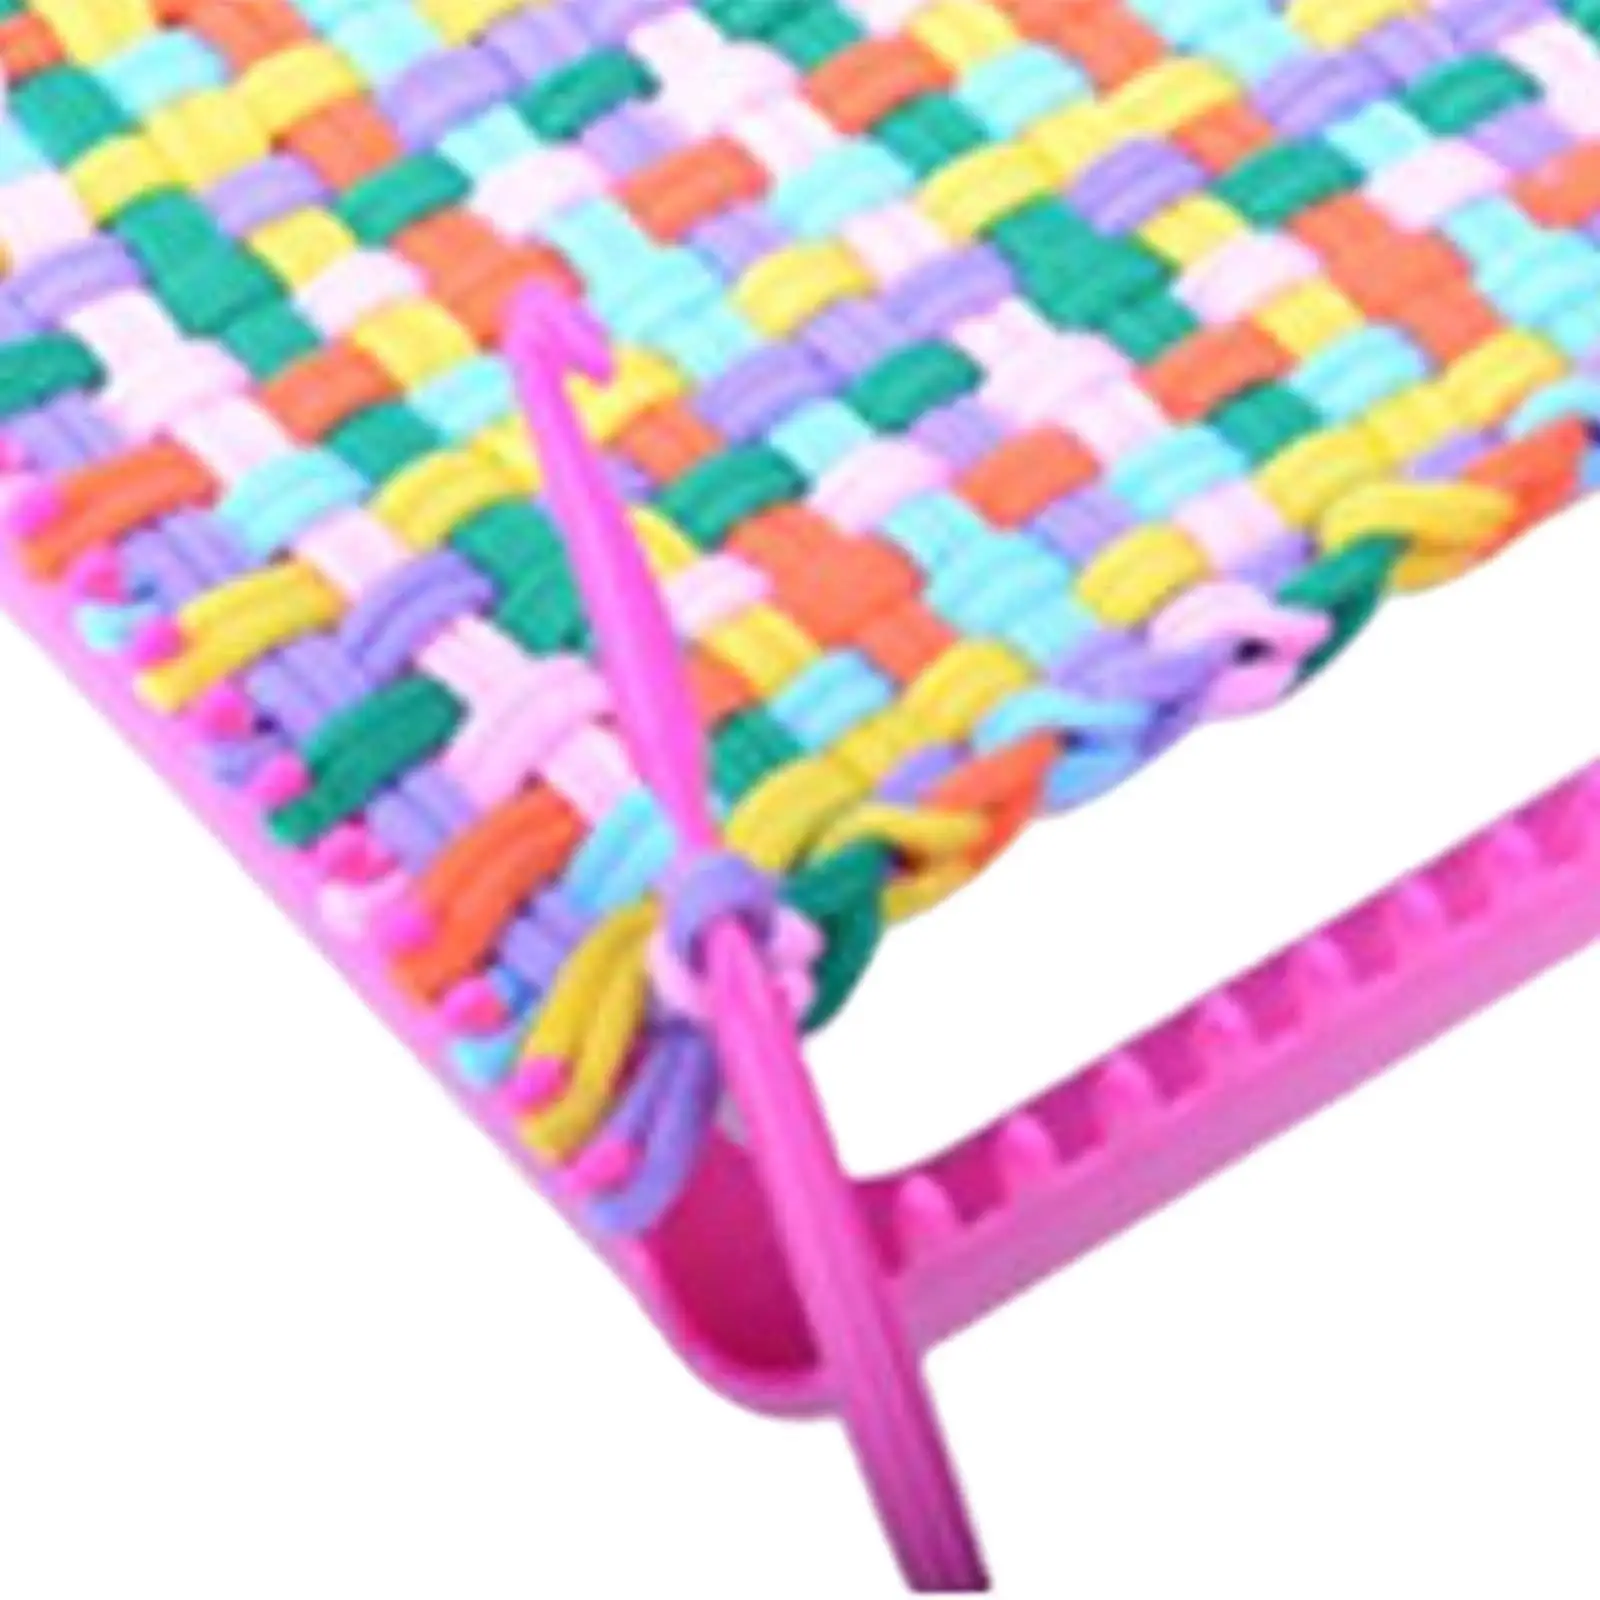 Square Knitting Loom set Rope with Knitting Hook for Kids Children Adults